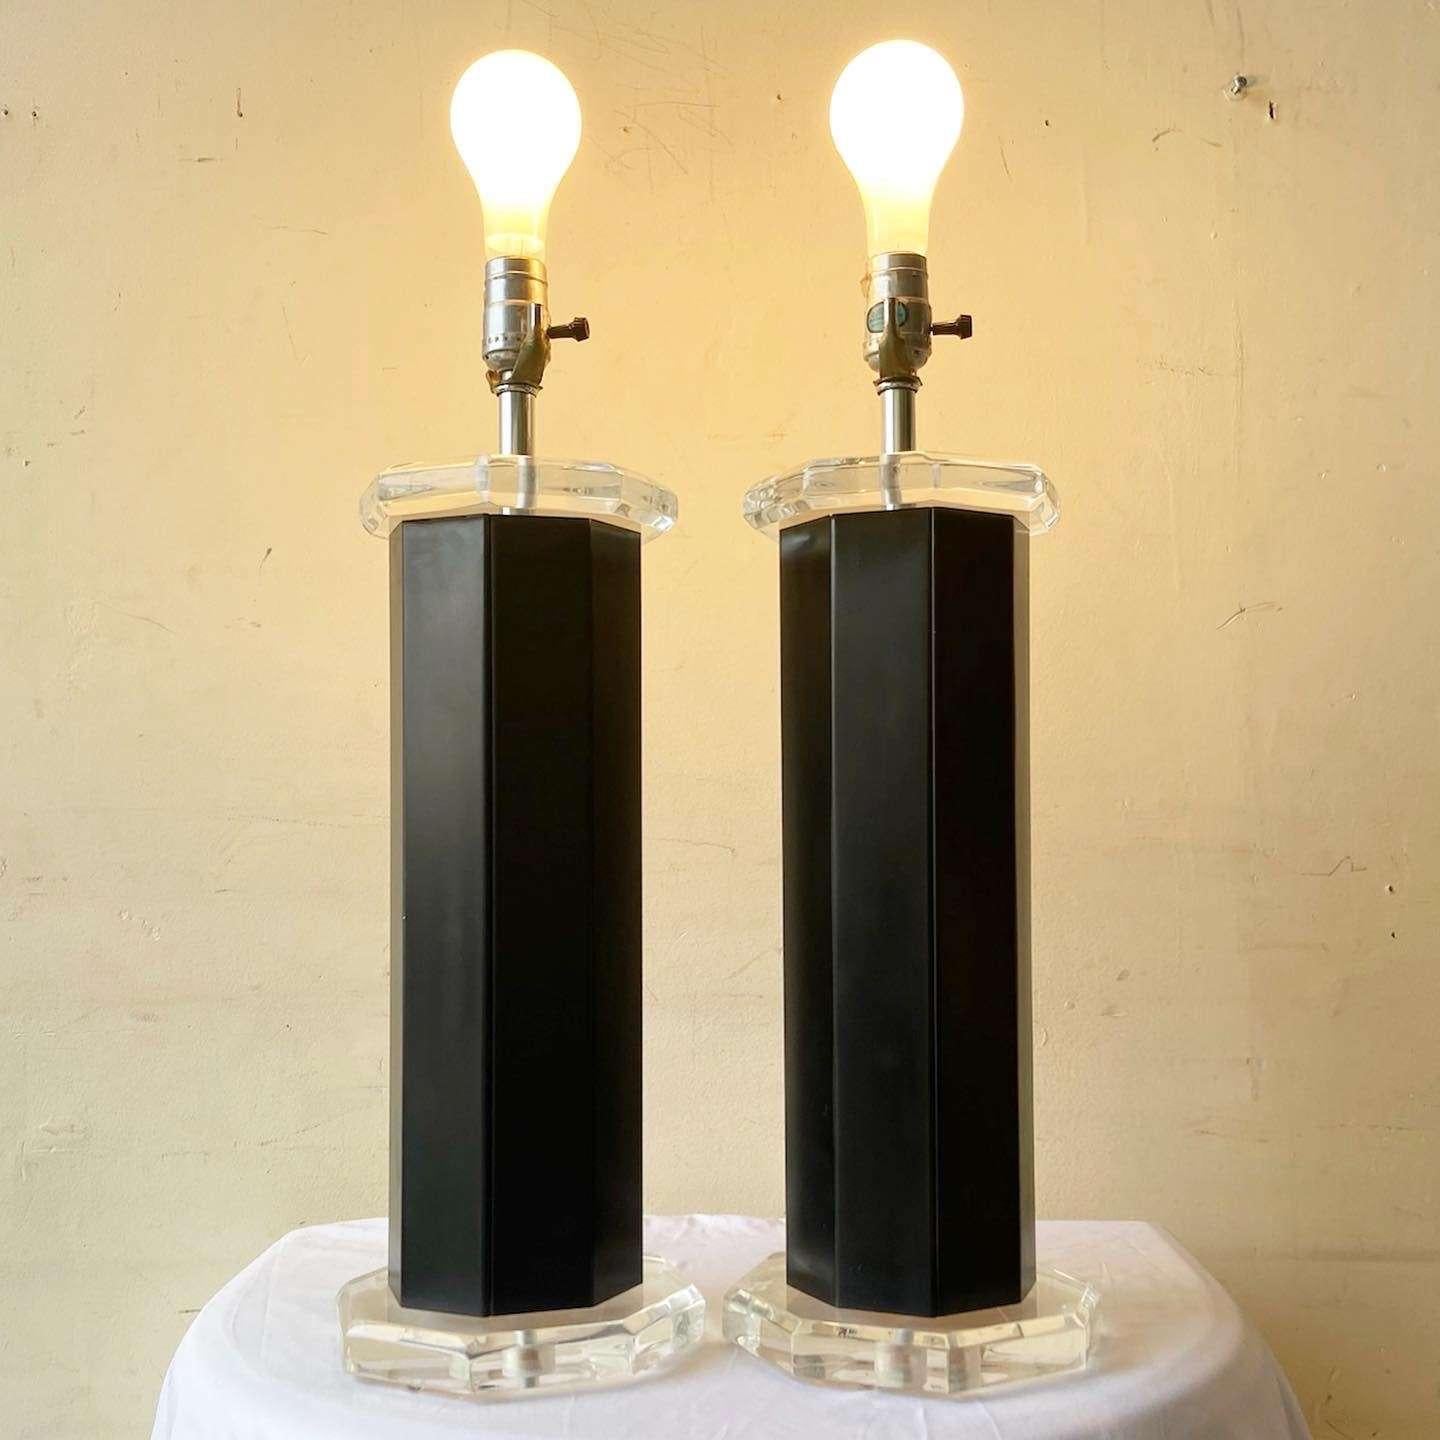 Exceptional pair of postmodern lucite and black metal table lamps. Each feature an octagonal shape with lucite above and beneath the black body.
